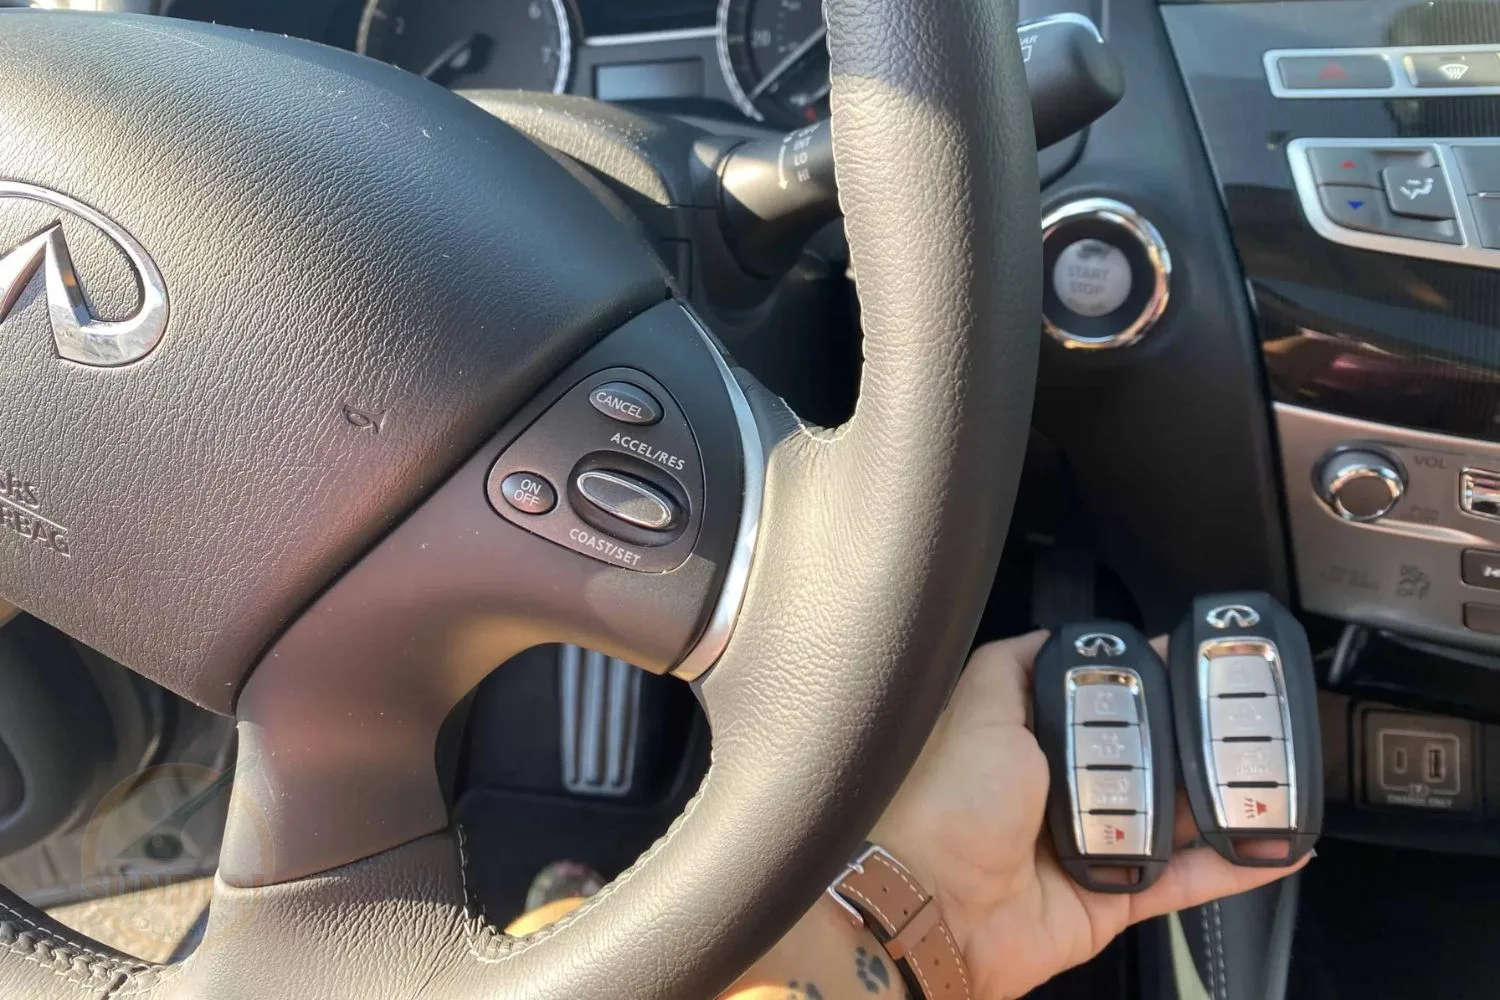 A person's hand holding two key fobs with a luxury vehicle's steering wheel and dashboard controls in the background.